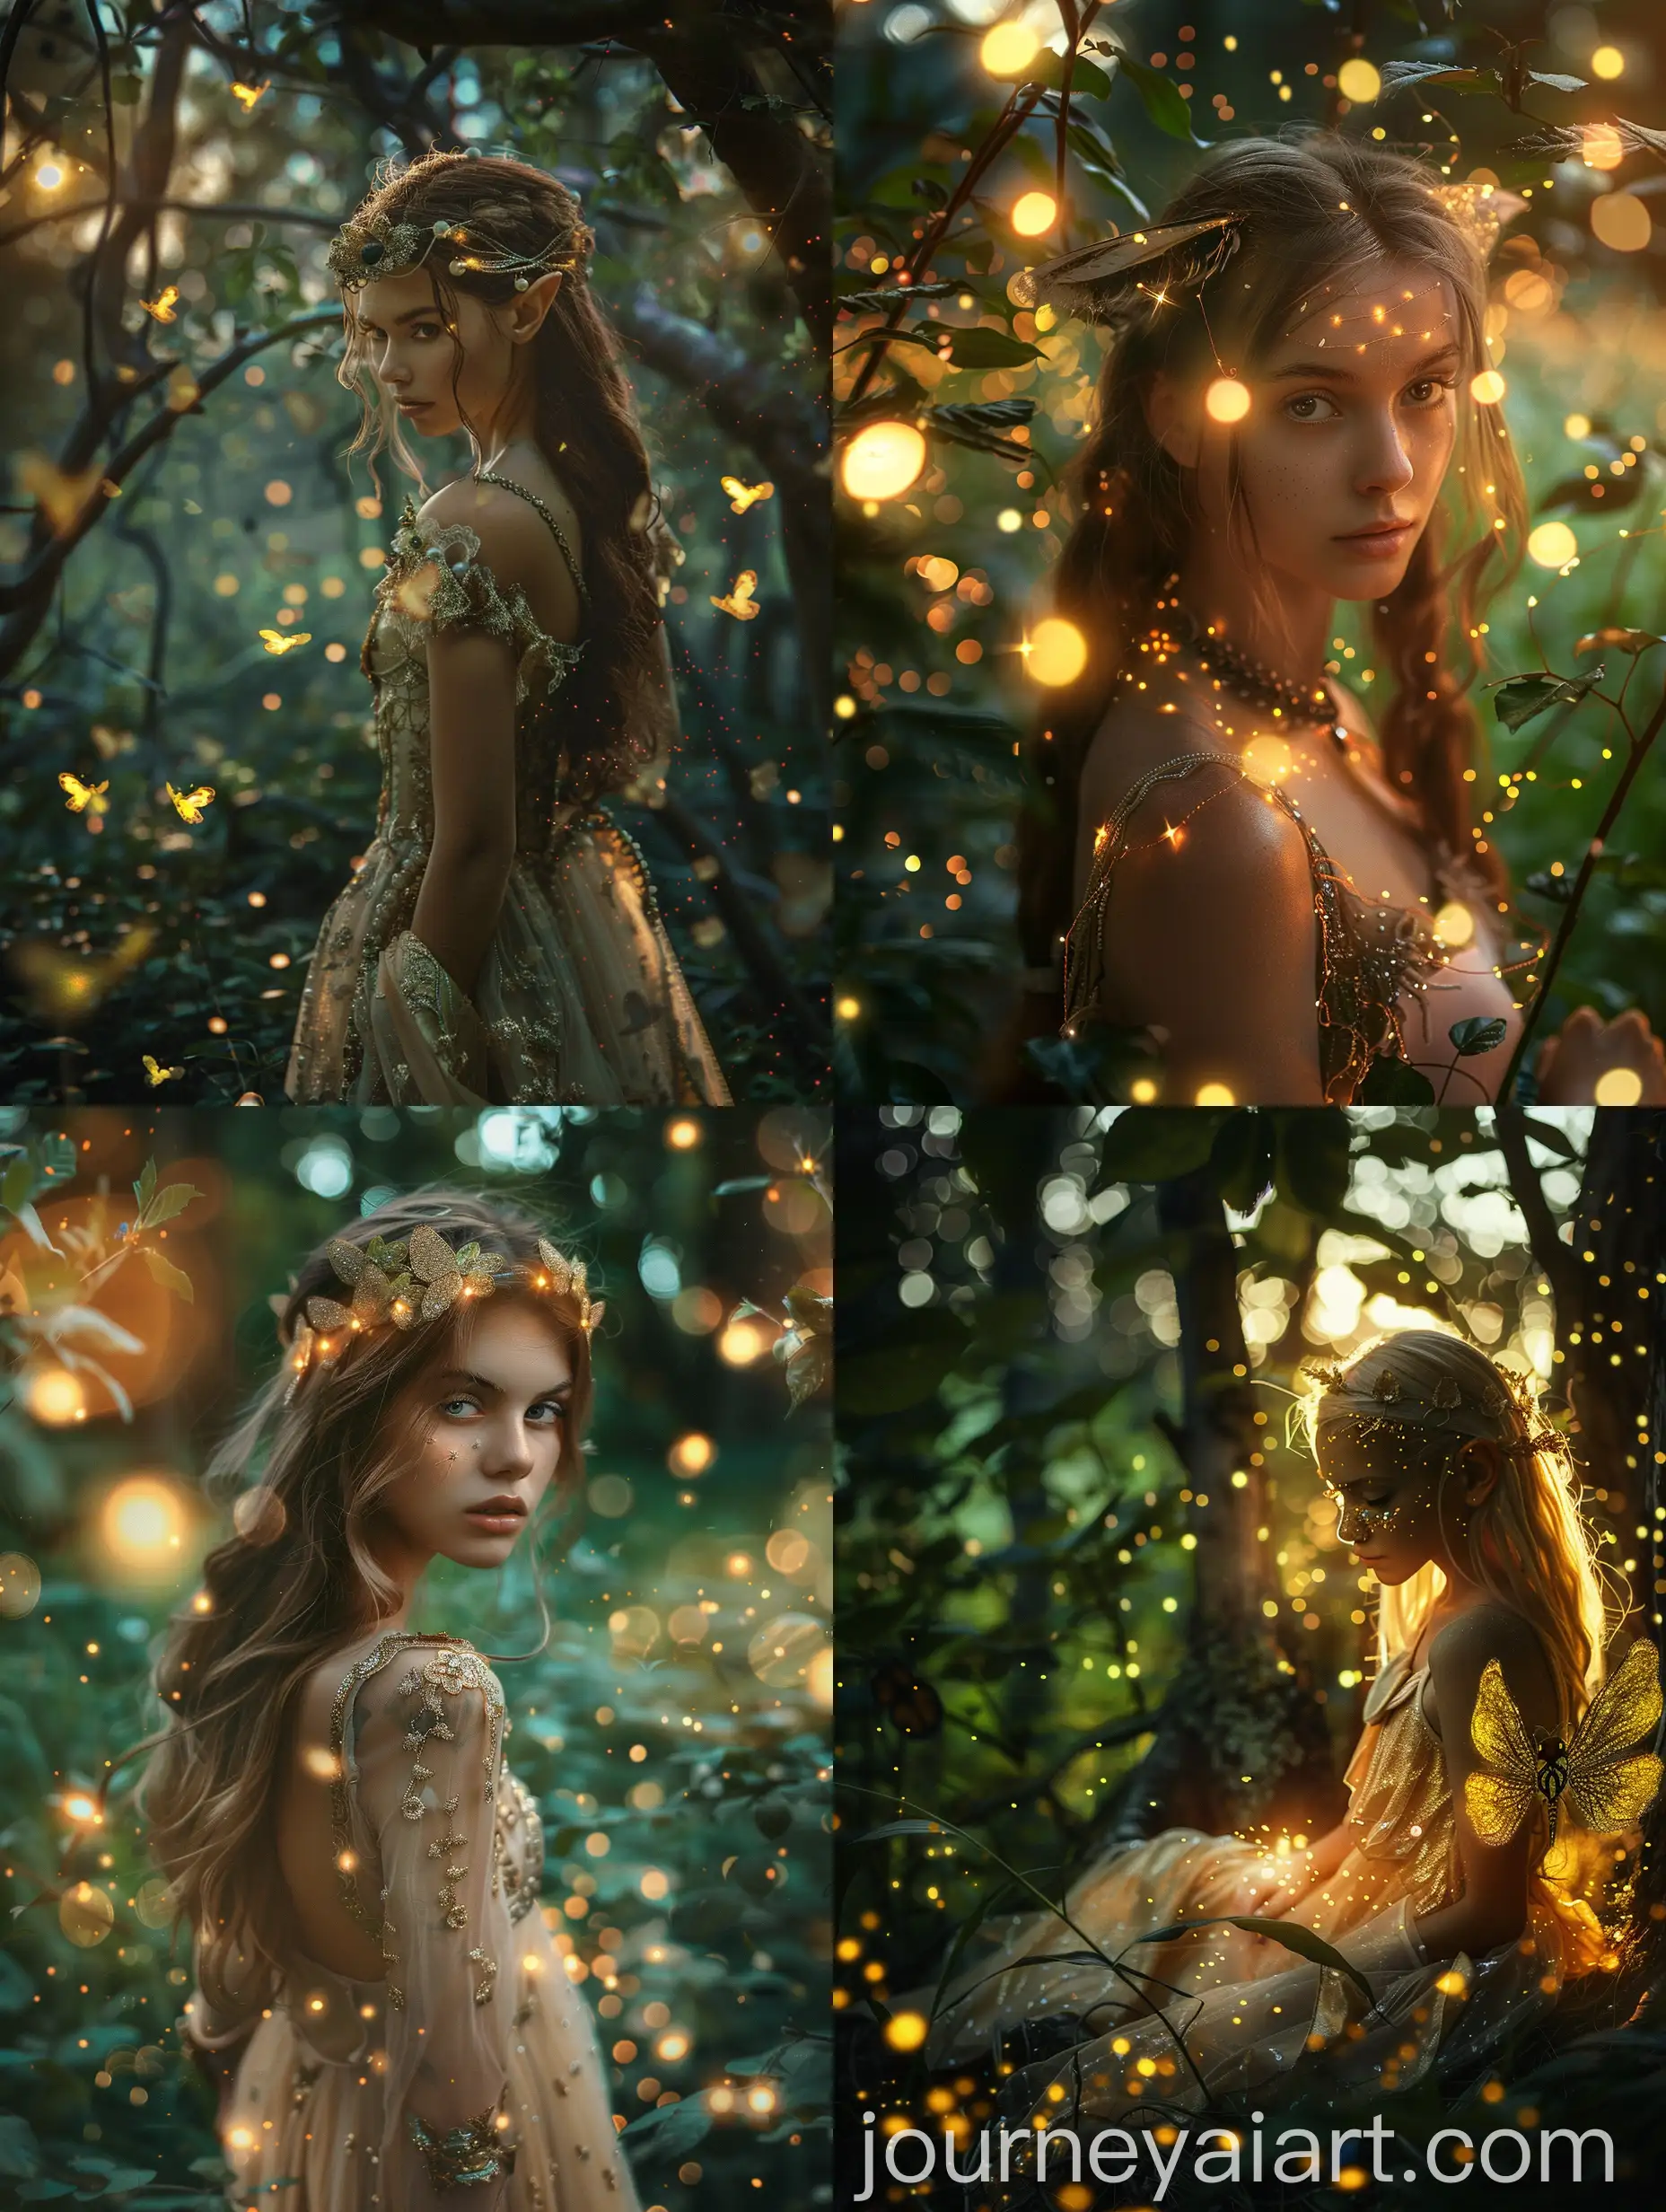 Enchanting-Elf-Princess-in-a-Magical-Forest-with-Fireflies